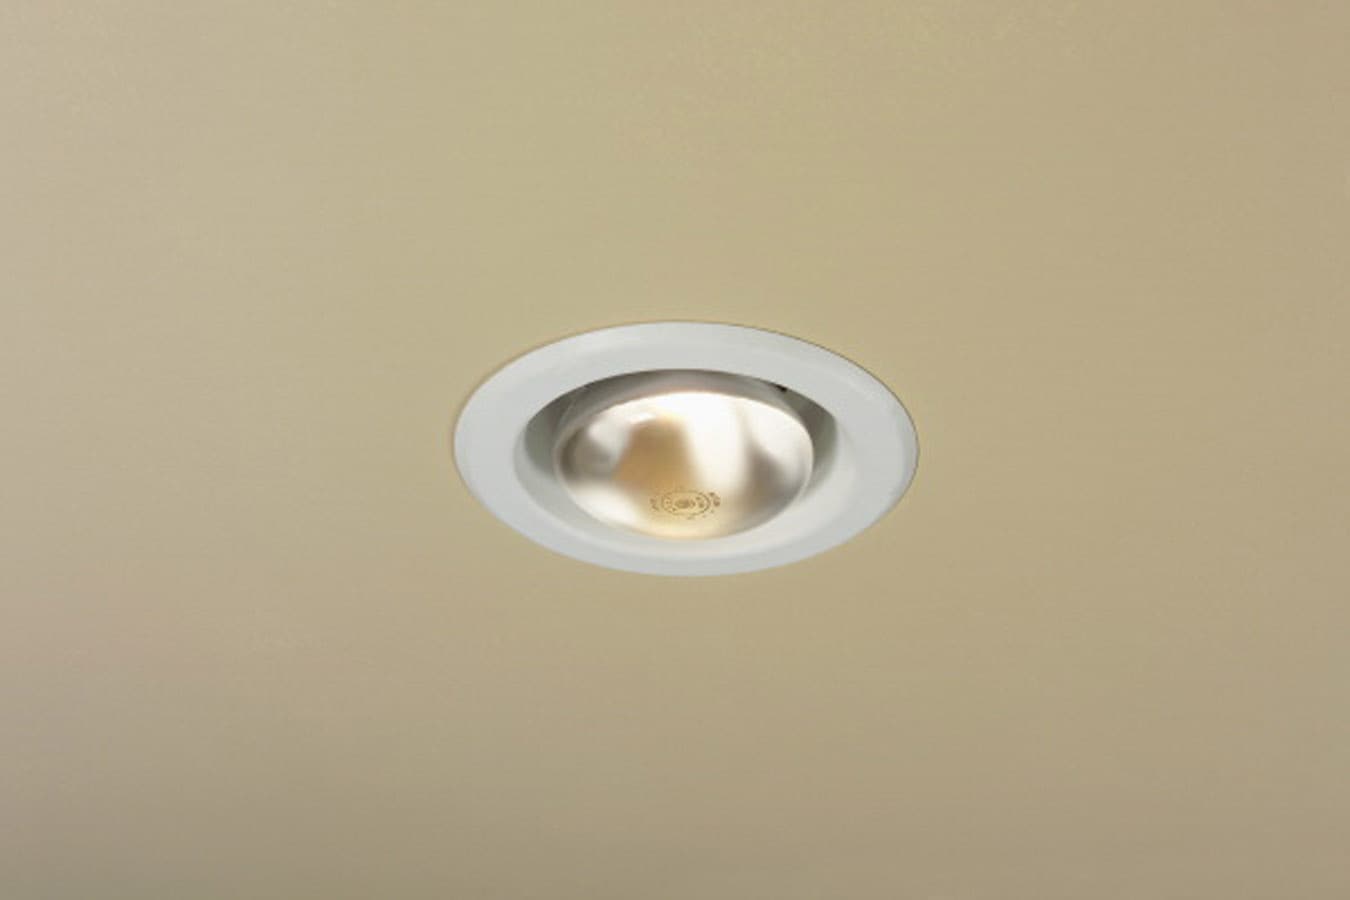 E26 Series 6 in. White Recessed Ceiling Light Open Trim with Socket Support